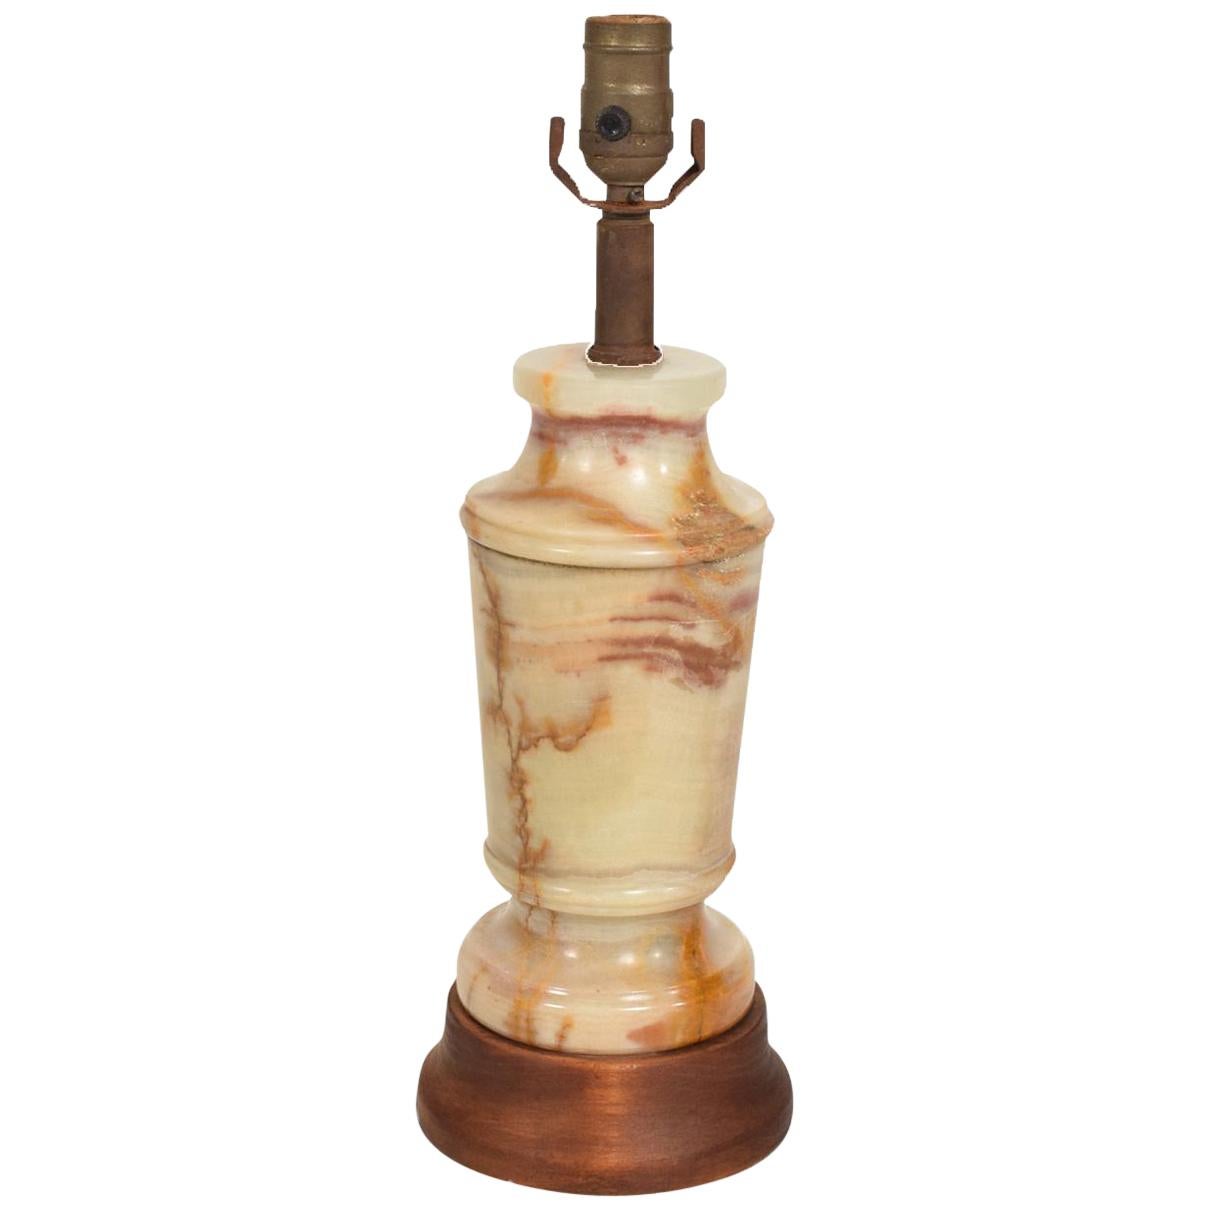 Hollywood Regency Table Lamp in Alabaster with Wood Base